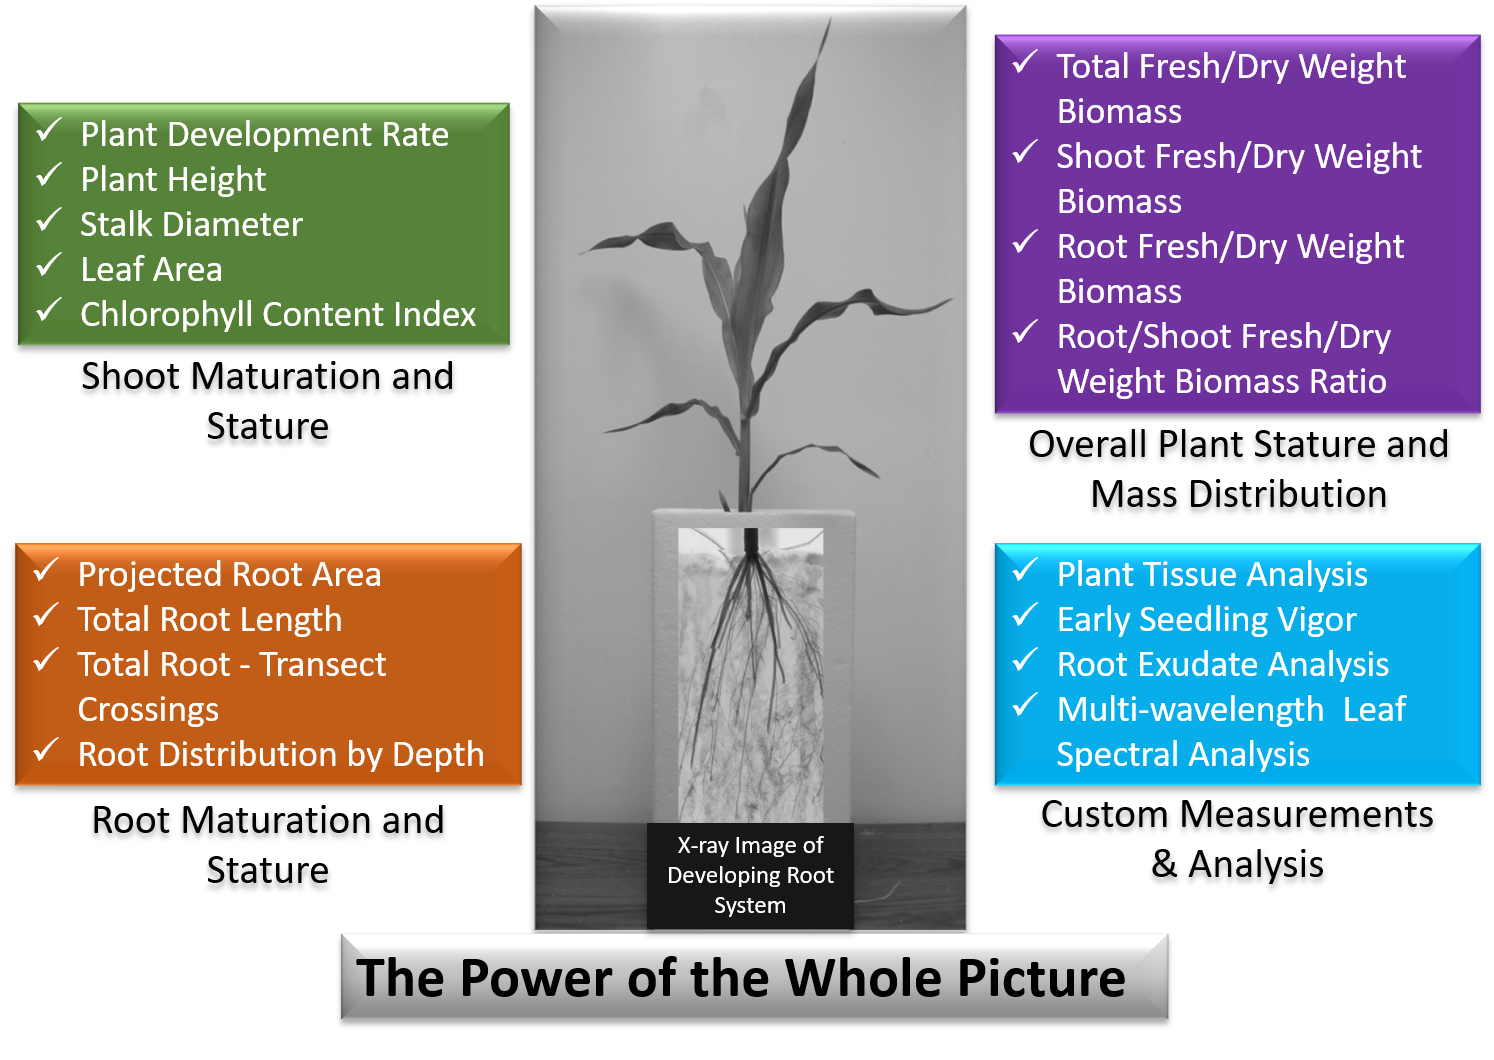 image - The Power of the Whole Picture